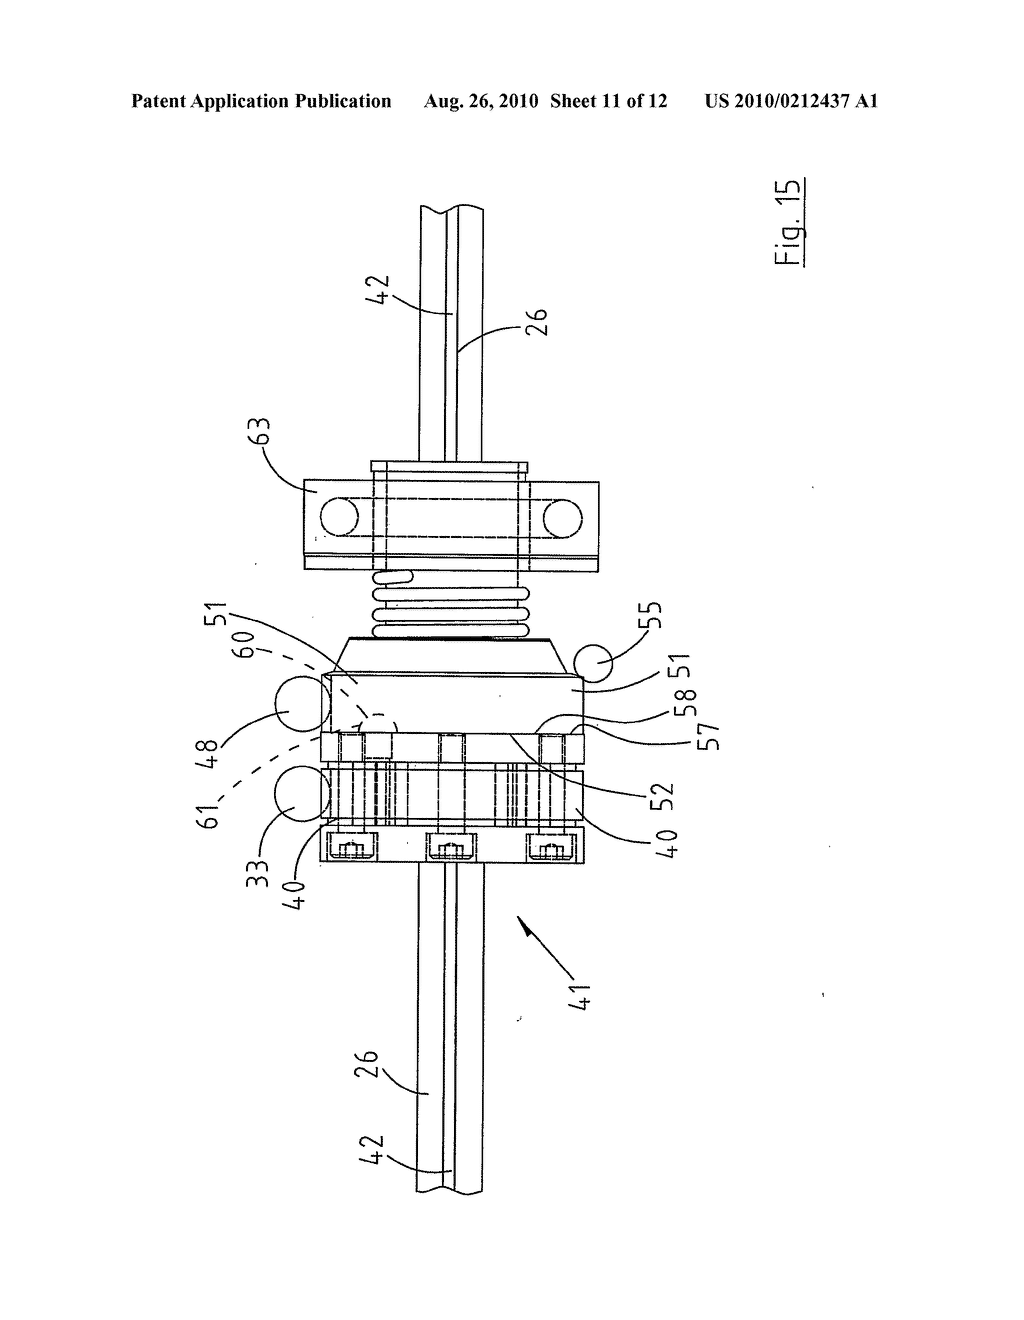  DEVICE FOR WITHDRAWING A LIQUID SAMPLE FROM A CONTAINER OR FOR DISCHARGING A LIQUID SAMPLE INTO A CONTAINER, AND APPARATUS INCORPORATING THE DEVICE FOR WITHDRAWING LIQUID SAMPLES FROM RESPECTIVE ONES OF A PLURALITY OF CONTAINERS OR FOR DISCHARGING LIQUID SAMPLES INTO RESPECTIVE ONES OF A PLURALITY OF CONTAINERS - diagram, schematic, and image 12